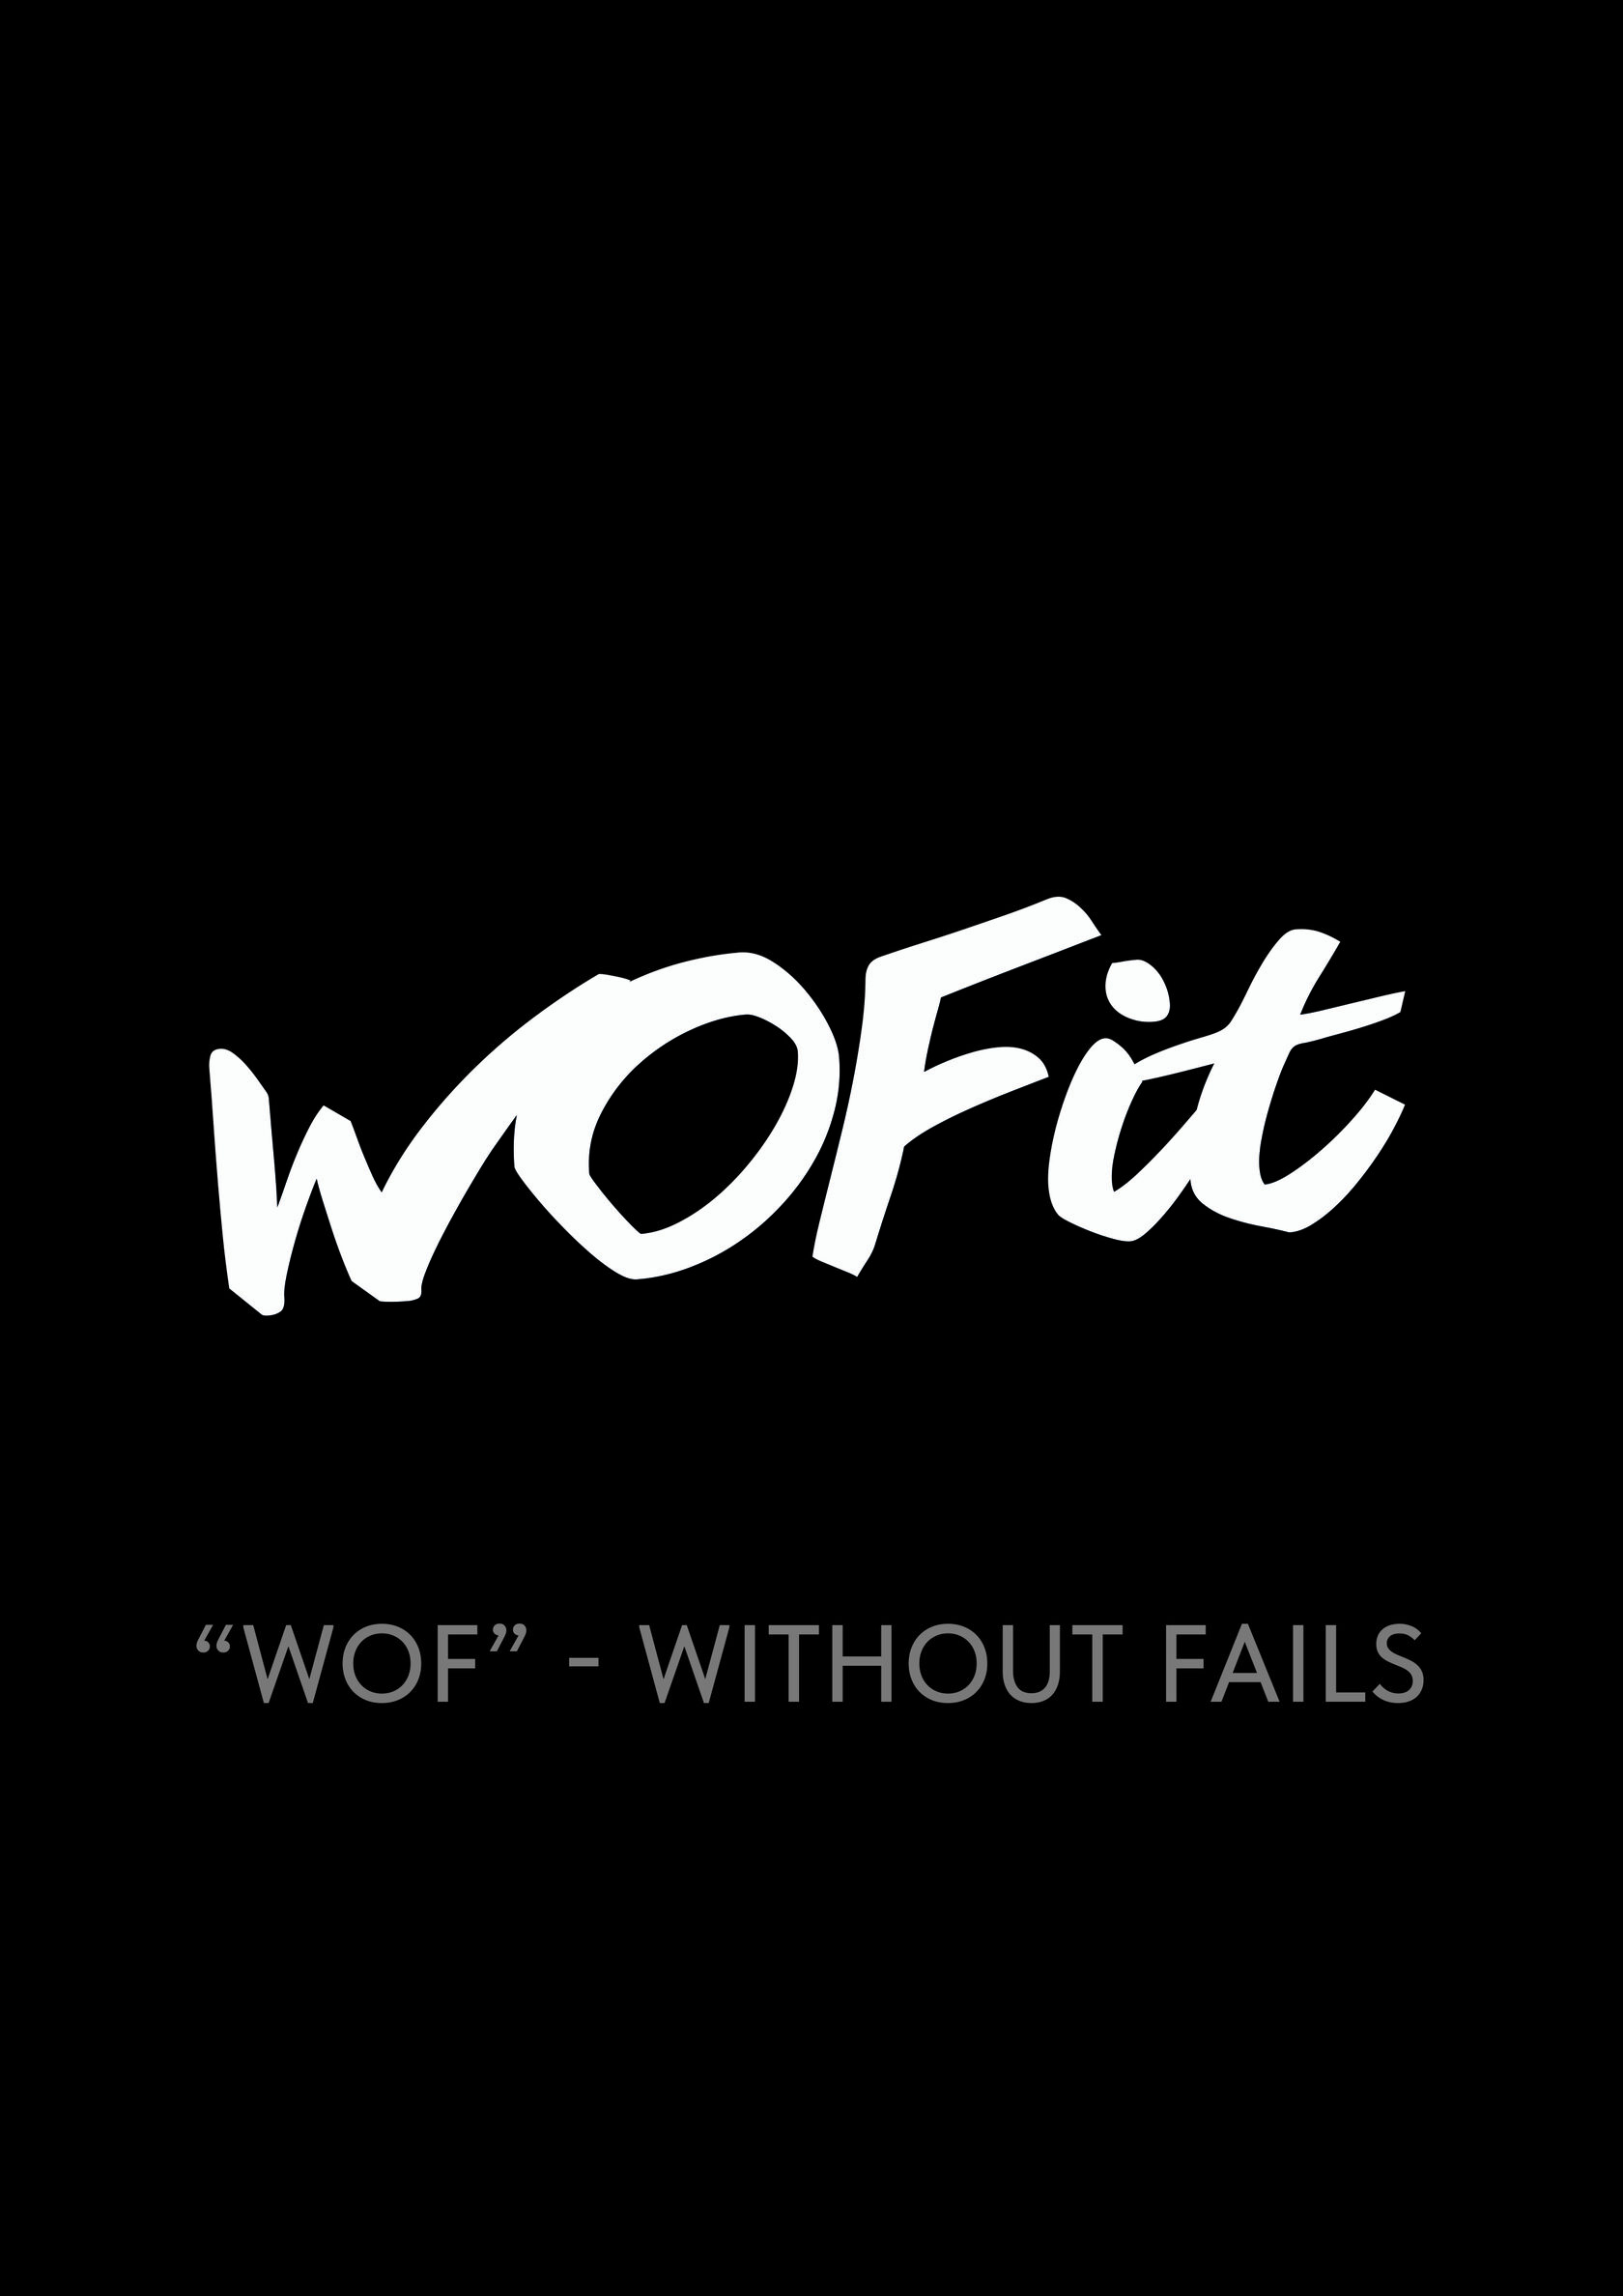 логотип WOFit - "fitness without fails"